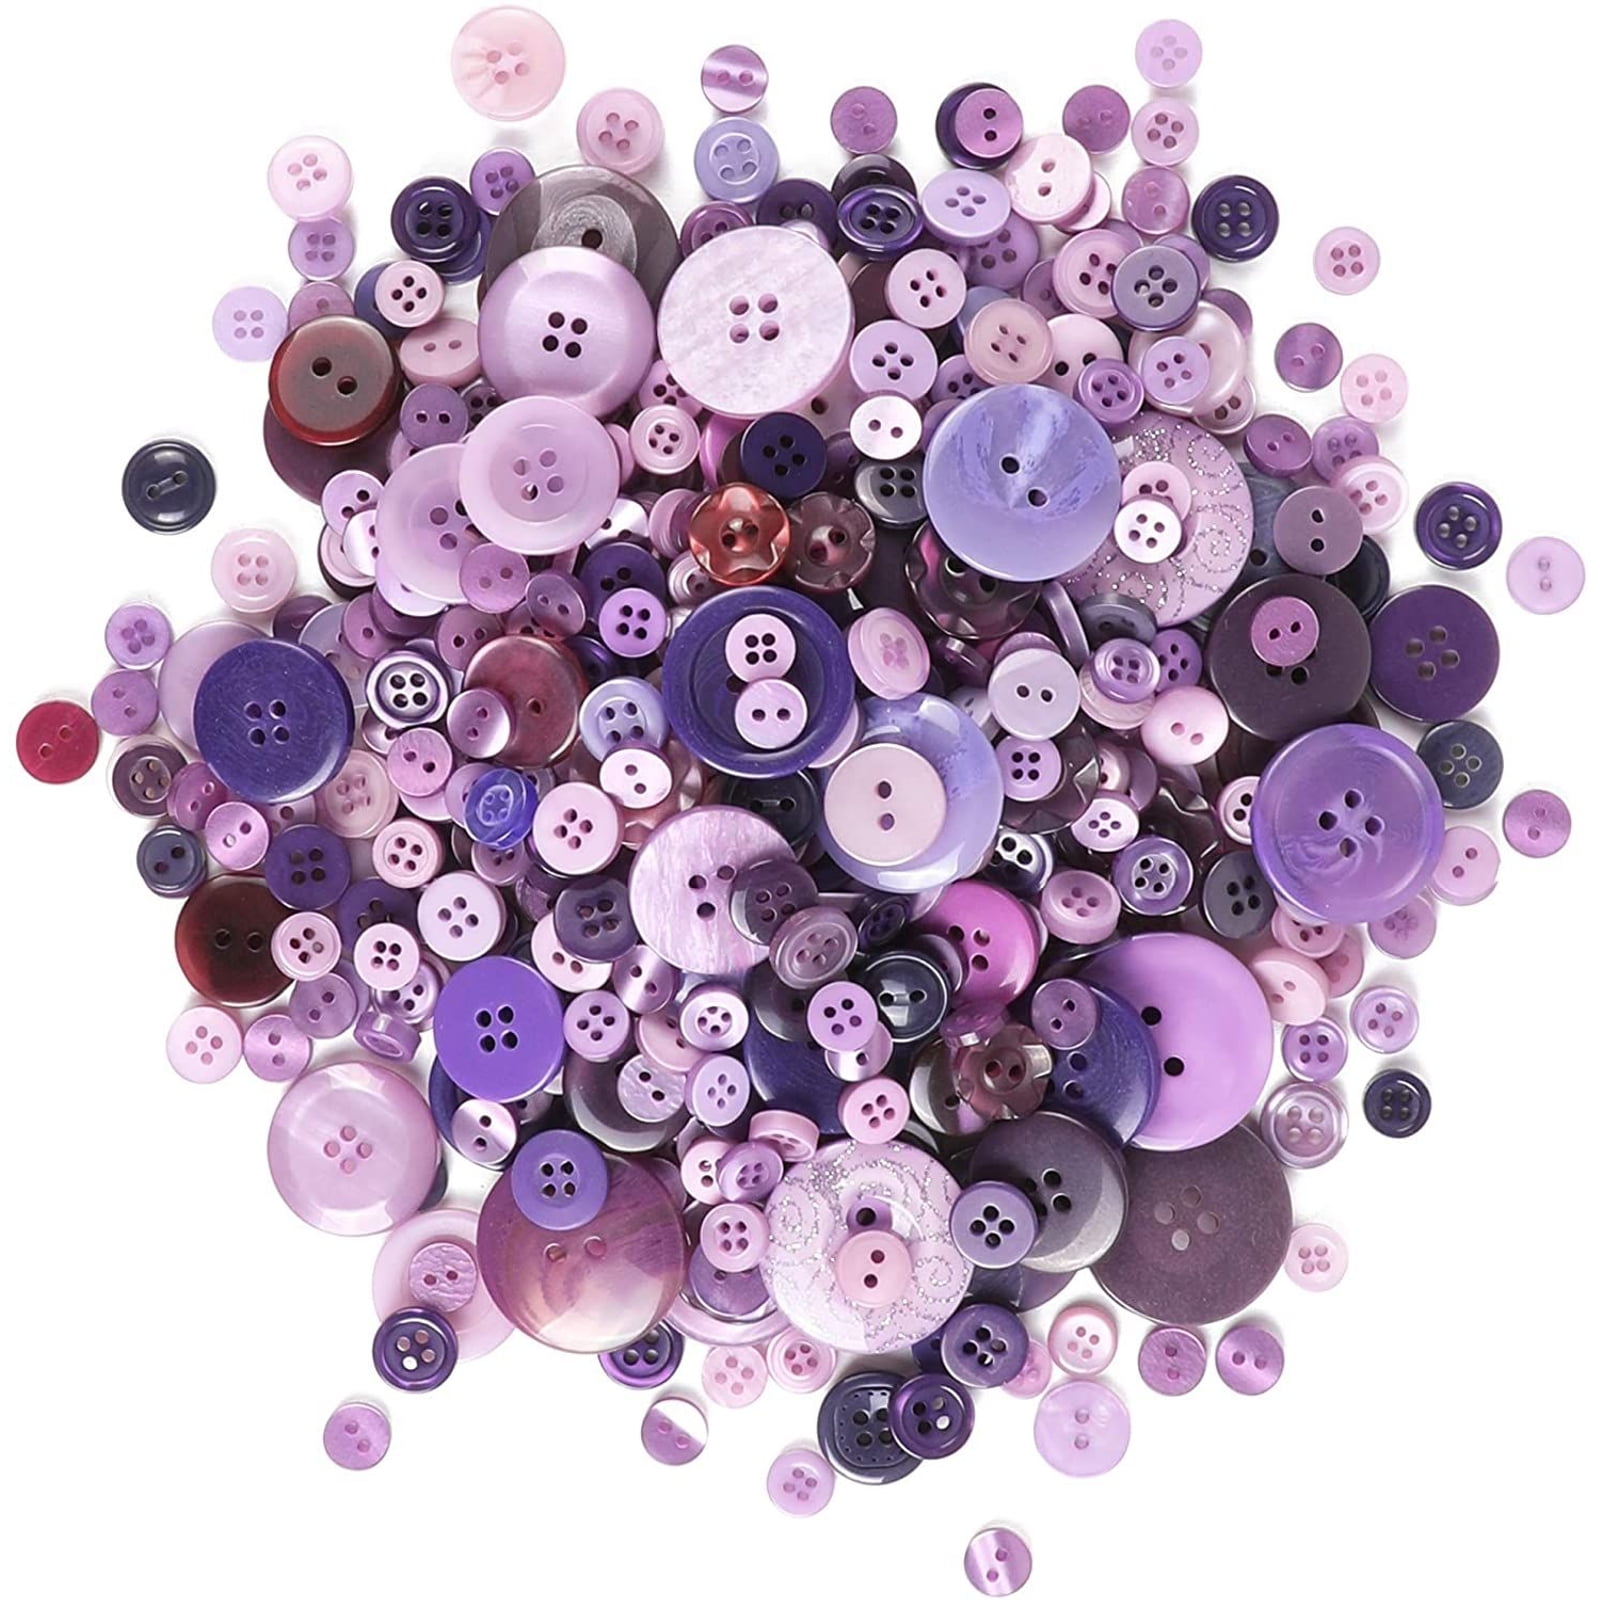 8 Violet Purple Plastic Heart Shaped 2 Hole Small Buttons 3/8” Lot P6